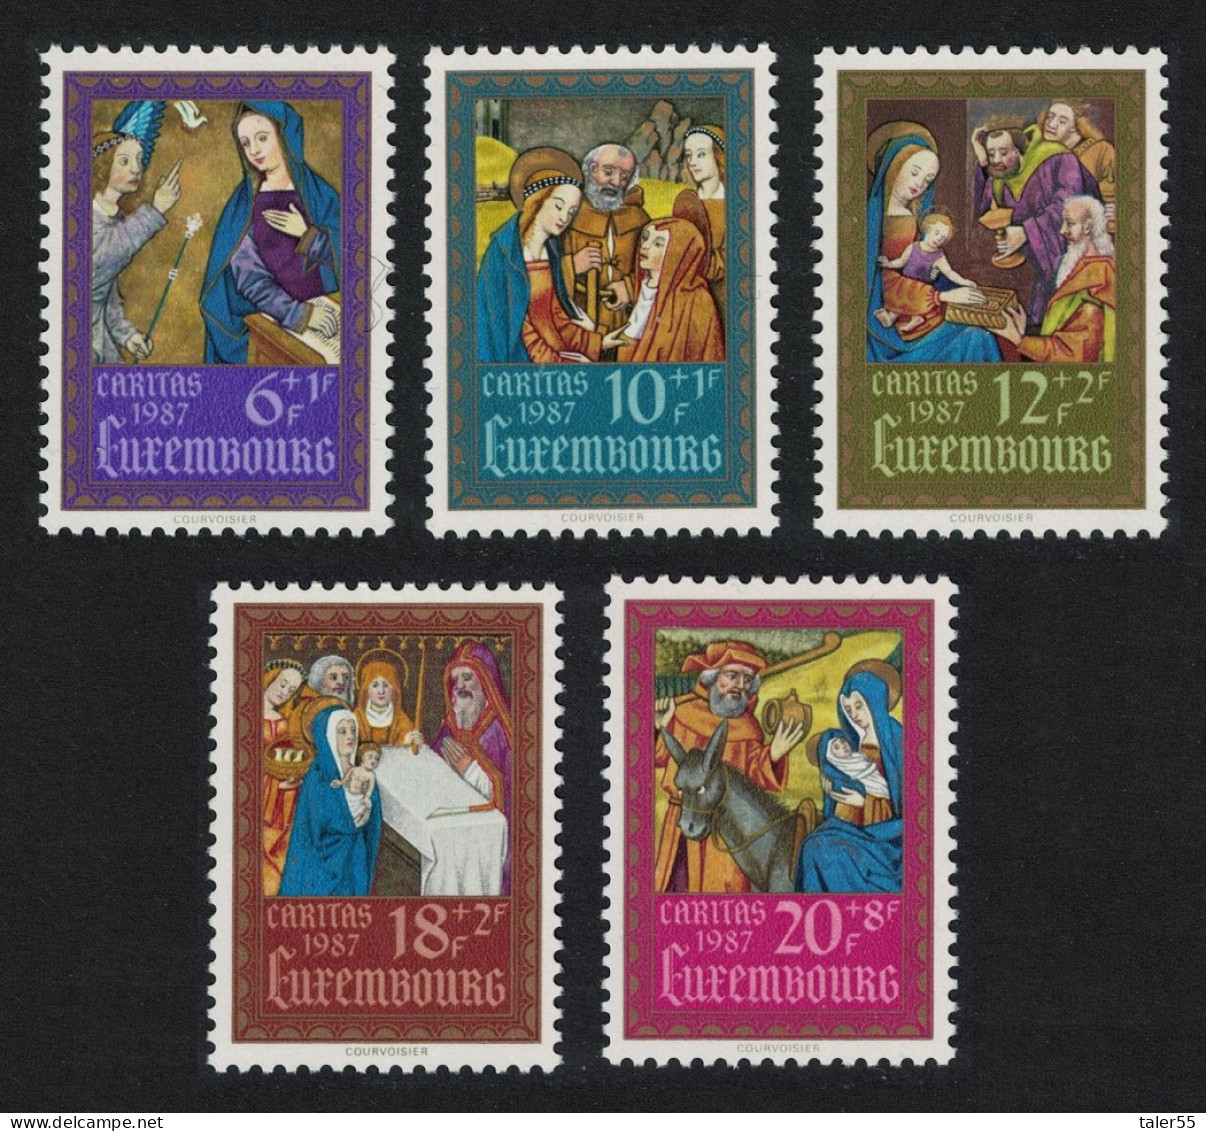 Luxembourg Illustrations From 'Book Of Hours' 5v 1987 MNH SG#1214-1218 MI#1185-1189 - Nuovi